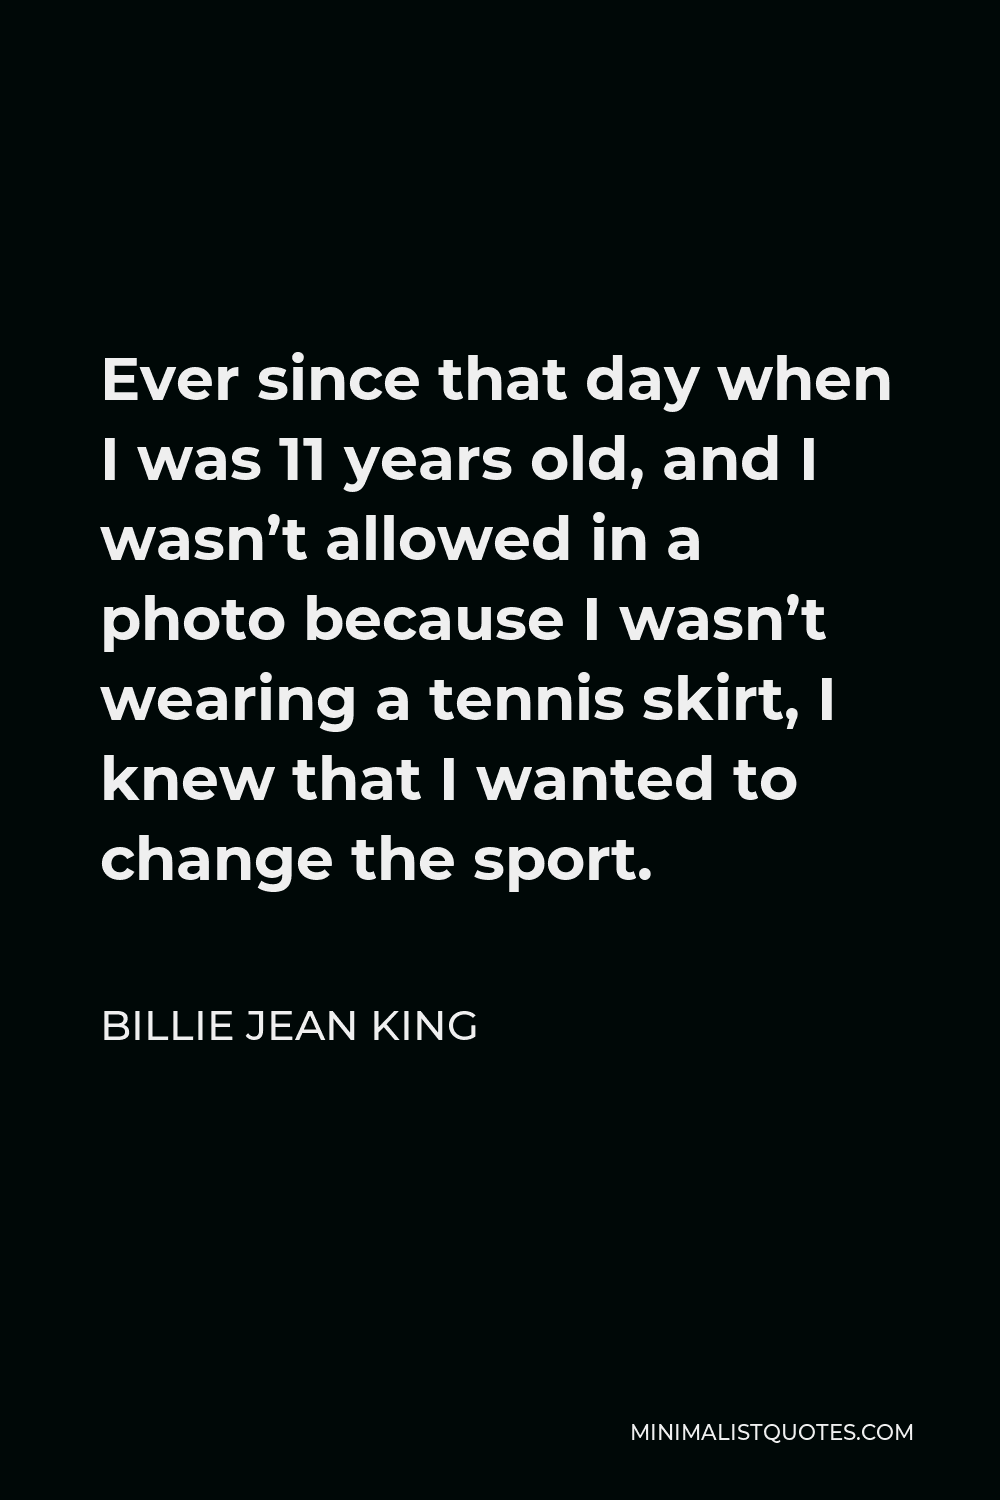 Billie Jean King Quote - Ever since that day when I was 11 years old, and I wasn’t allowed in a photo because I wasn’t wearing a tennis skirt, I knew that I wanted to change the sport.